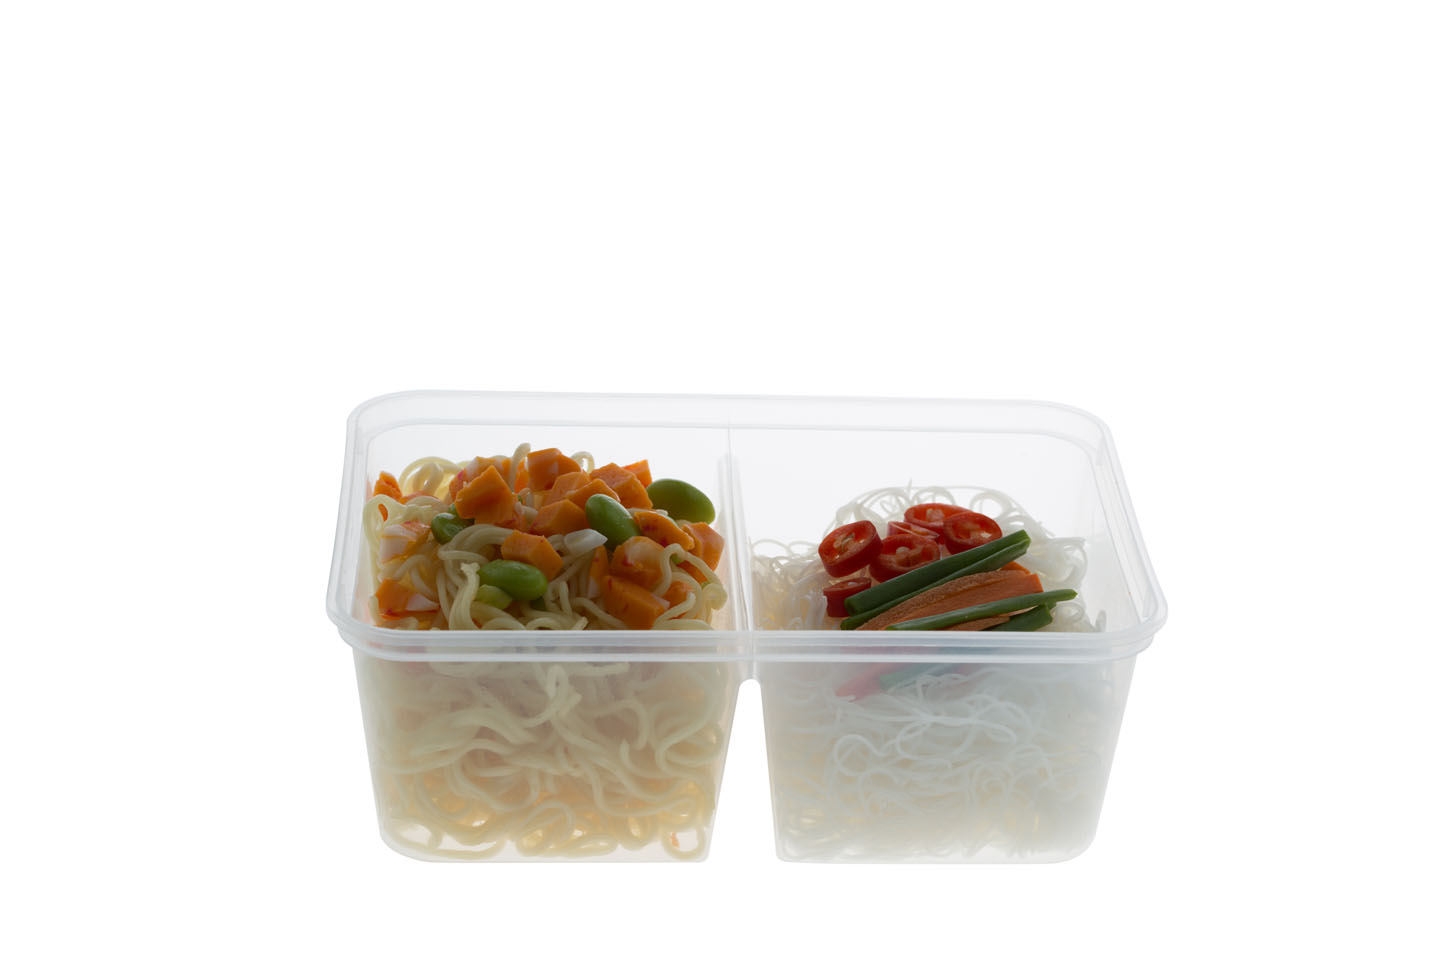 650ml 2 Compartment Rectangular Microwavable Container serving pumpkin+edamame on top of thin egg noodles and chilli+spring onion+carrot on top of rice vermicelli noodles.